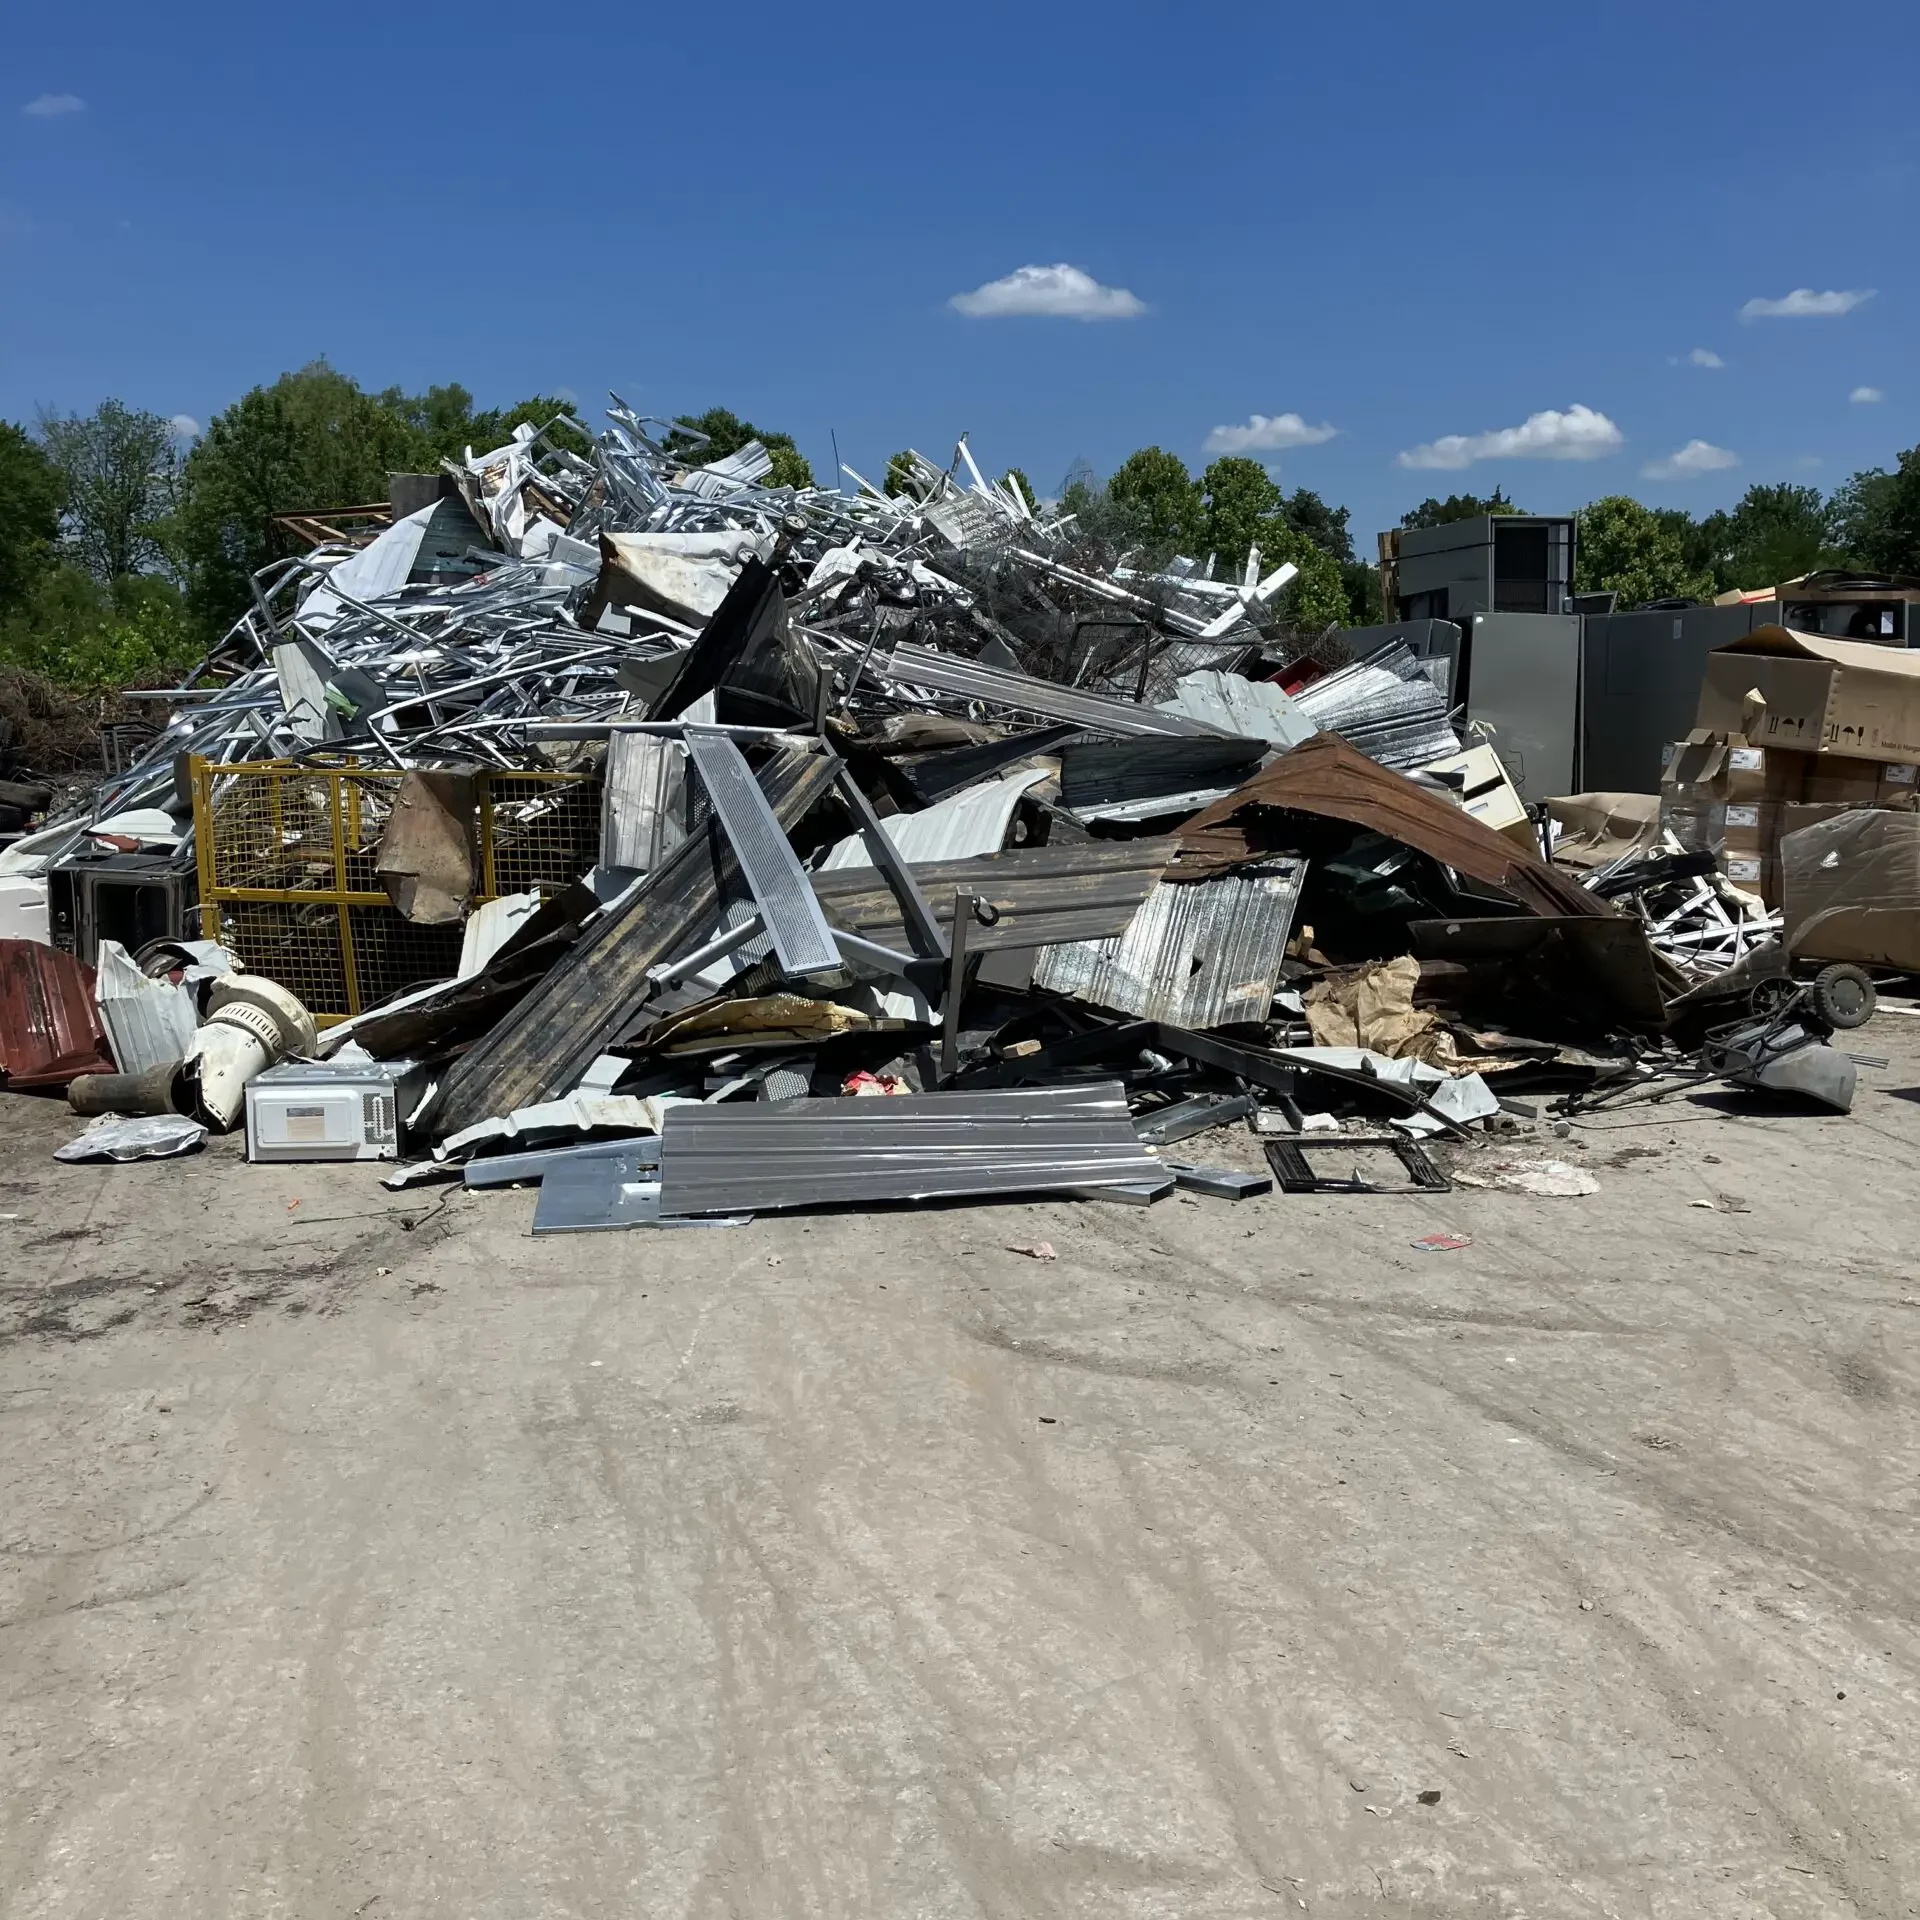 A pile of metal waiting to be recycled at Rockwood Sustainable Solutions in Lebanon.